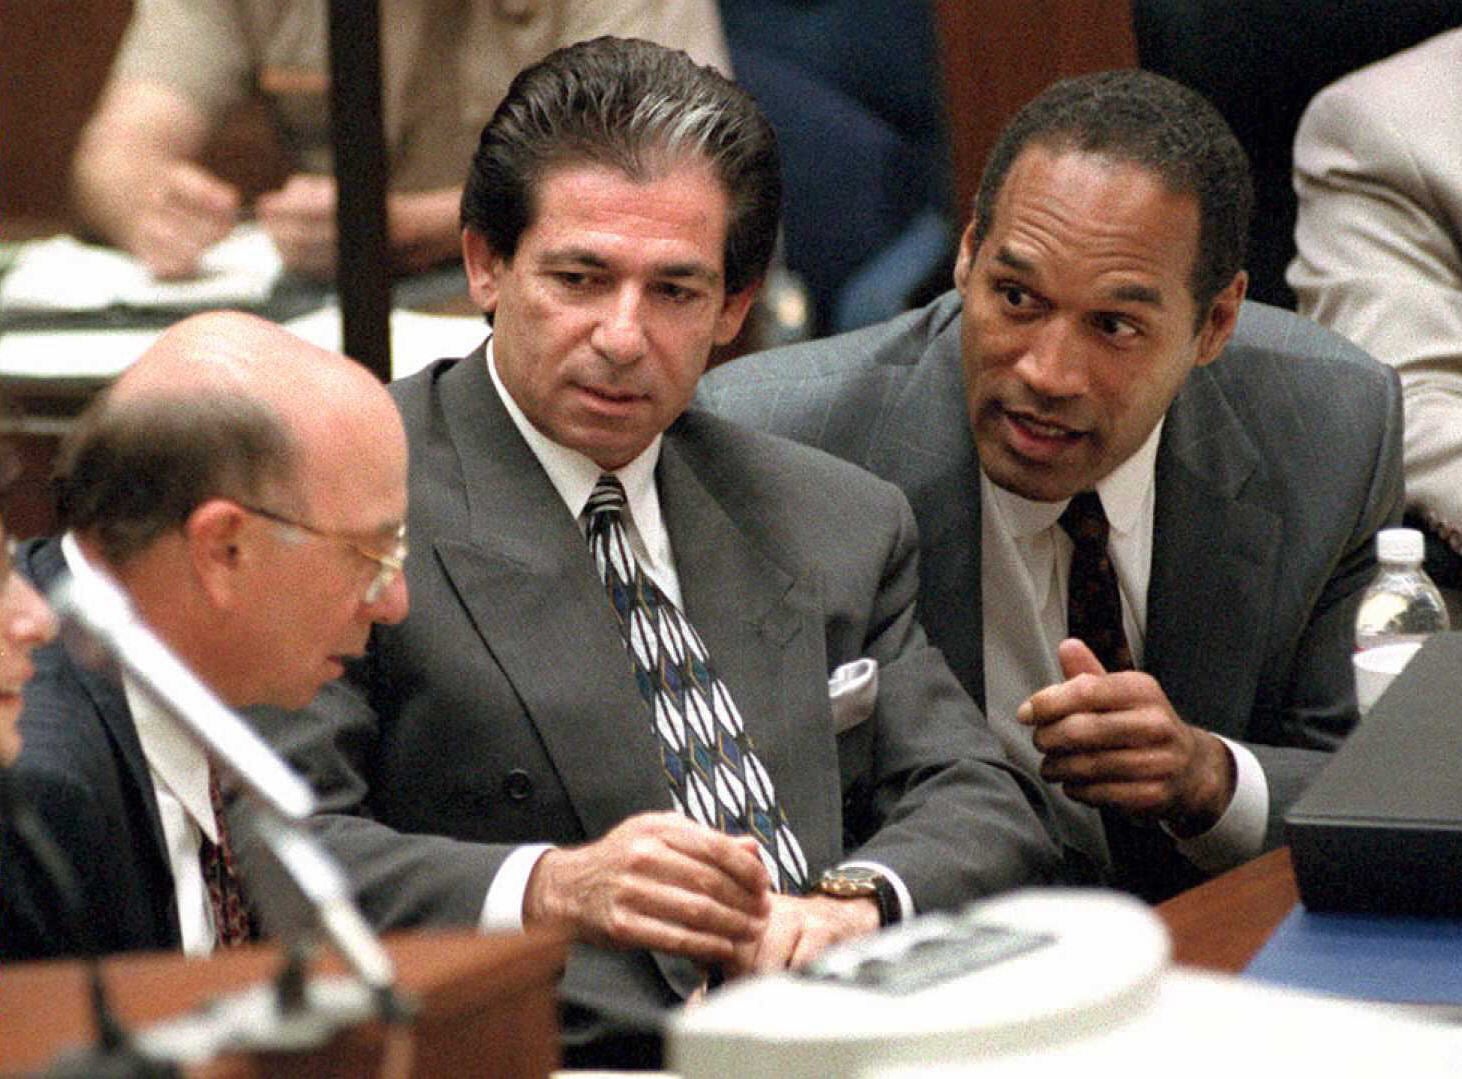 Must See: New Trailer Released for 'The People v. O.J. Simpson'